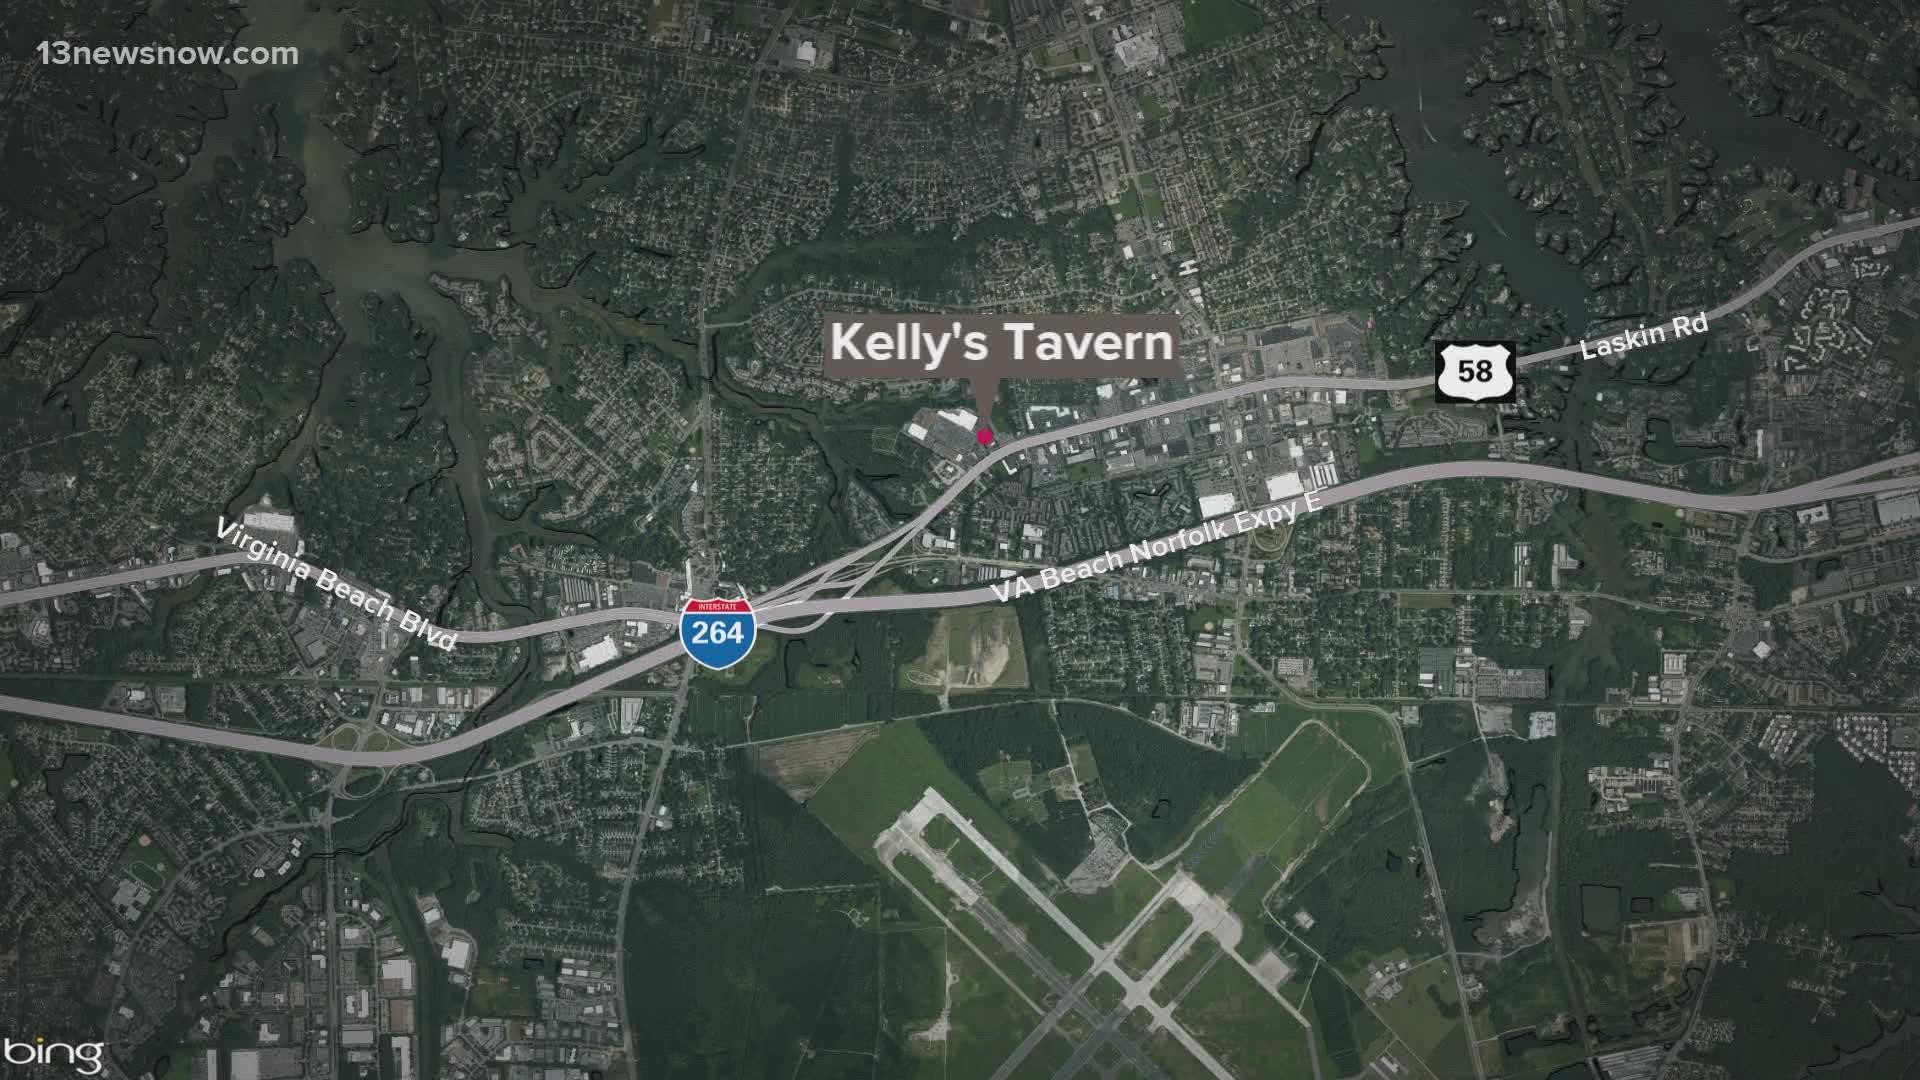 The incident happened just before 1a.m. Wednesday at Kelly's Tavern on Laskin Road.